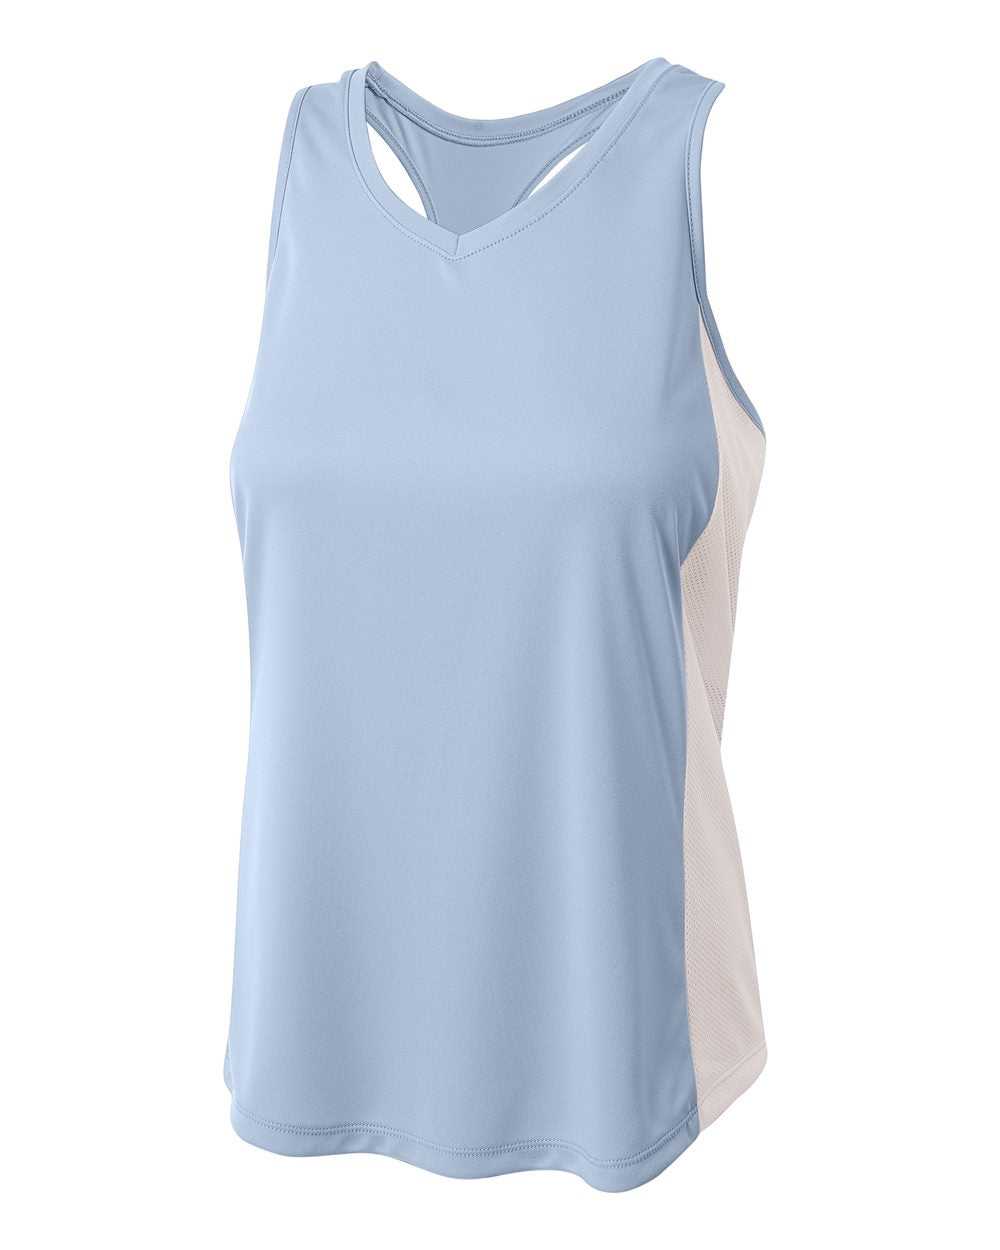 A4 NW2009 Pacer Singlet with Racerback - Light Blue White - HIT a Double